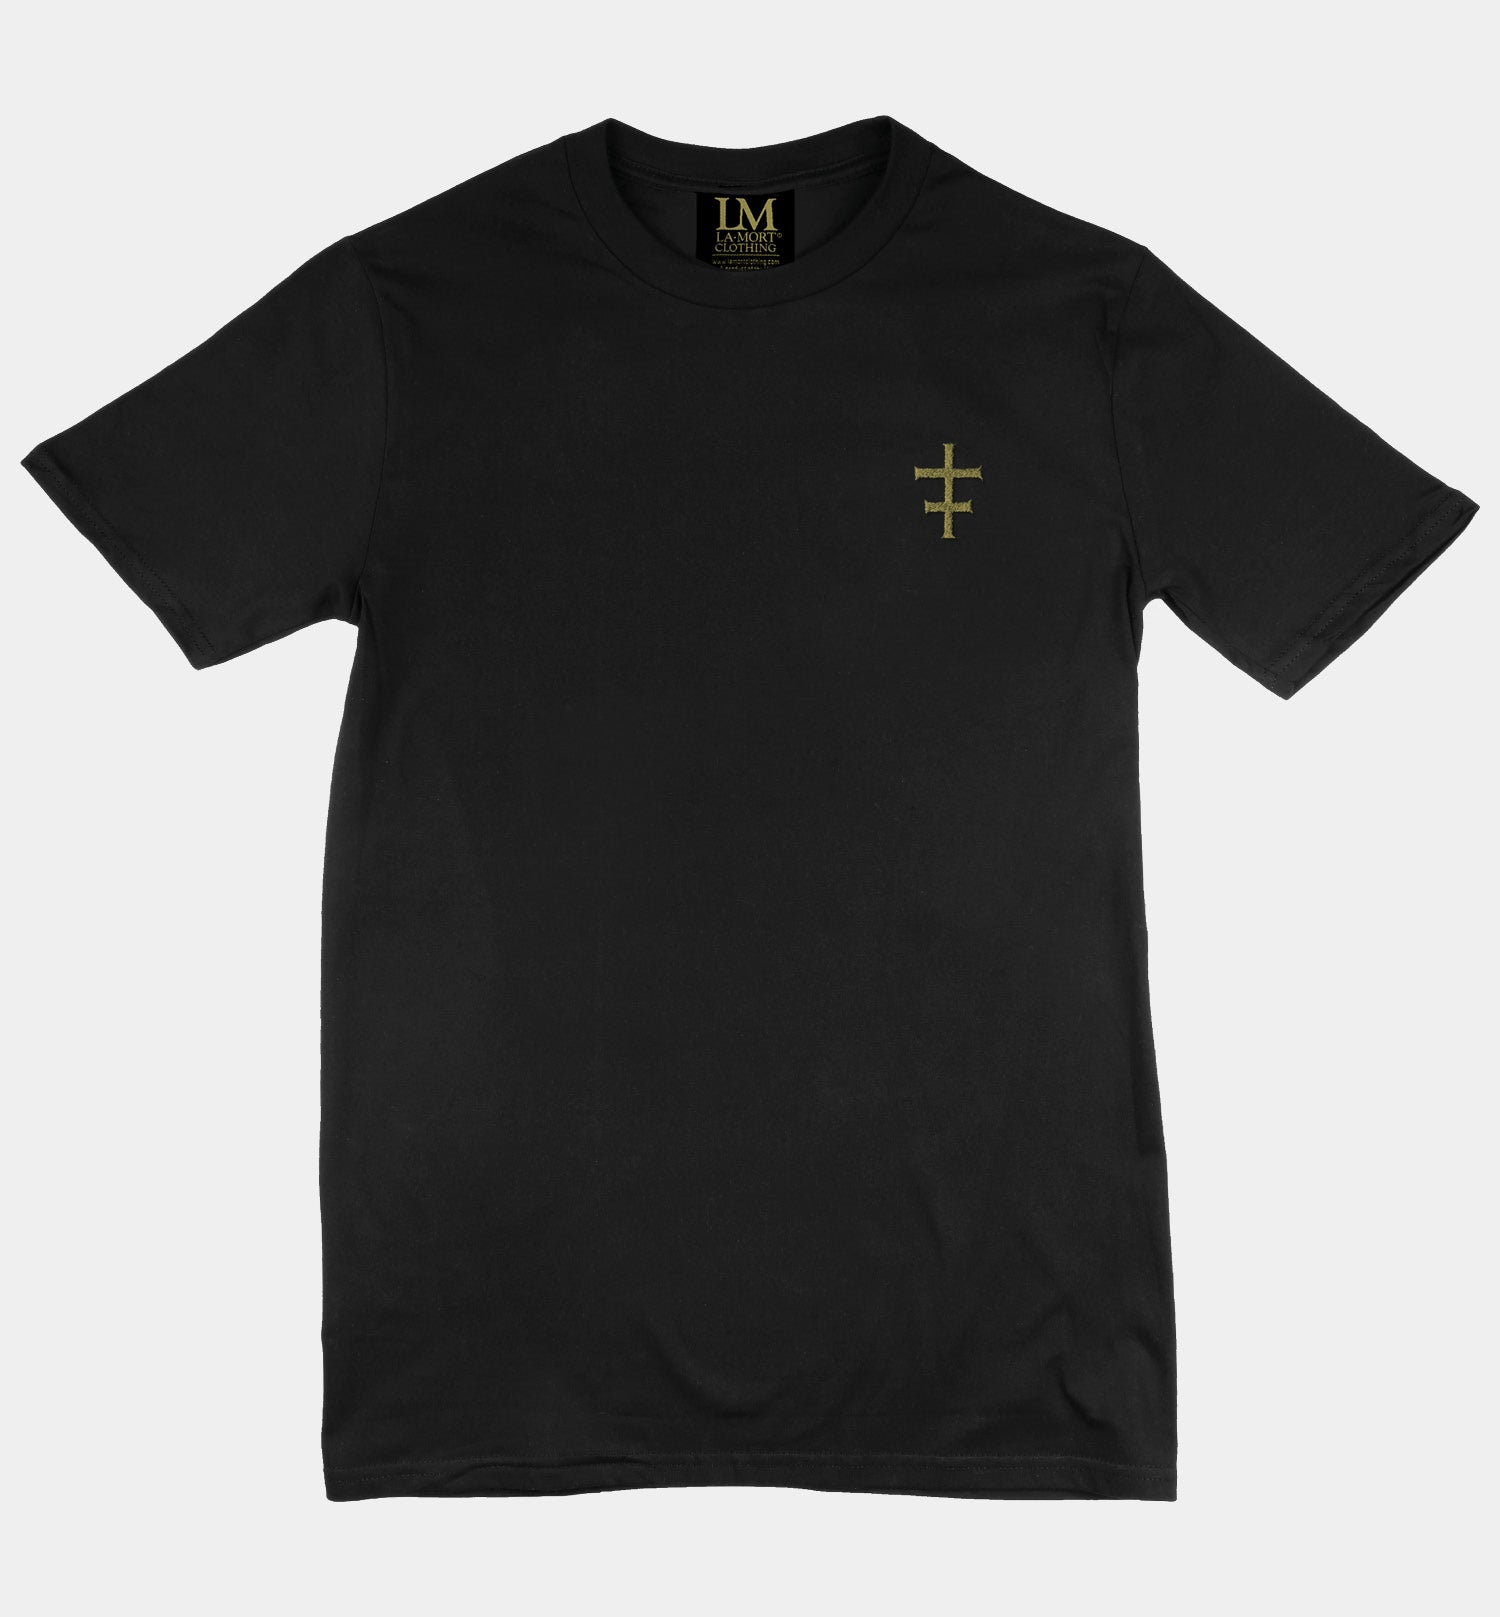 Morality Occult Tattoo Men's Double-sided T-shirt by La Mort